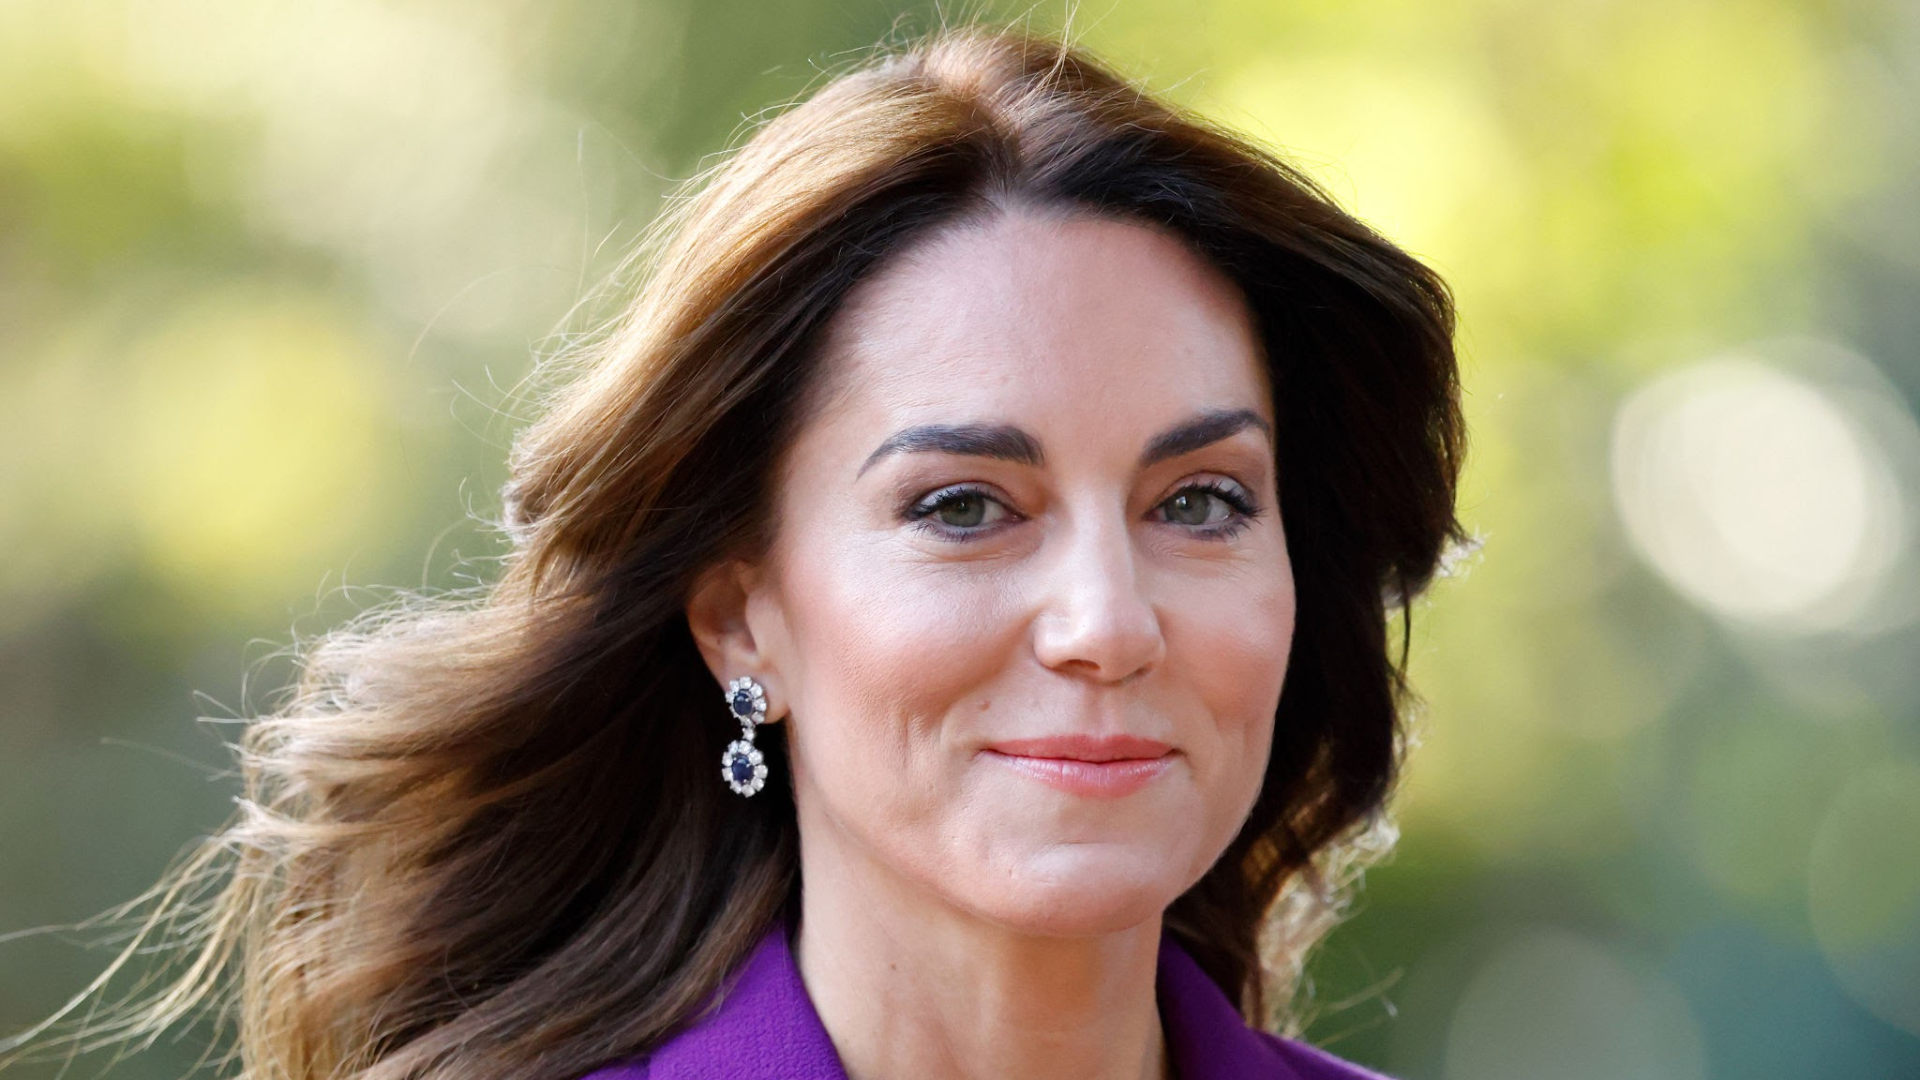 Princess Of Wales Kate Middleton Discloses Cancer Diagnosis, Undergoing Chemotherapy